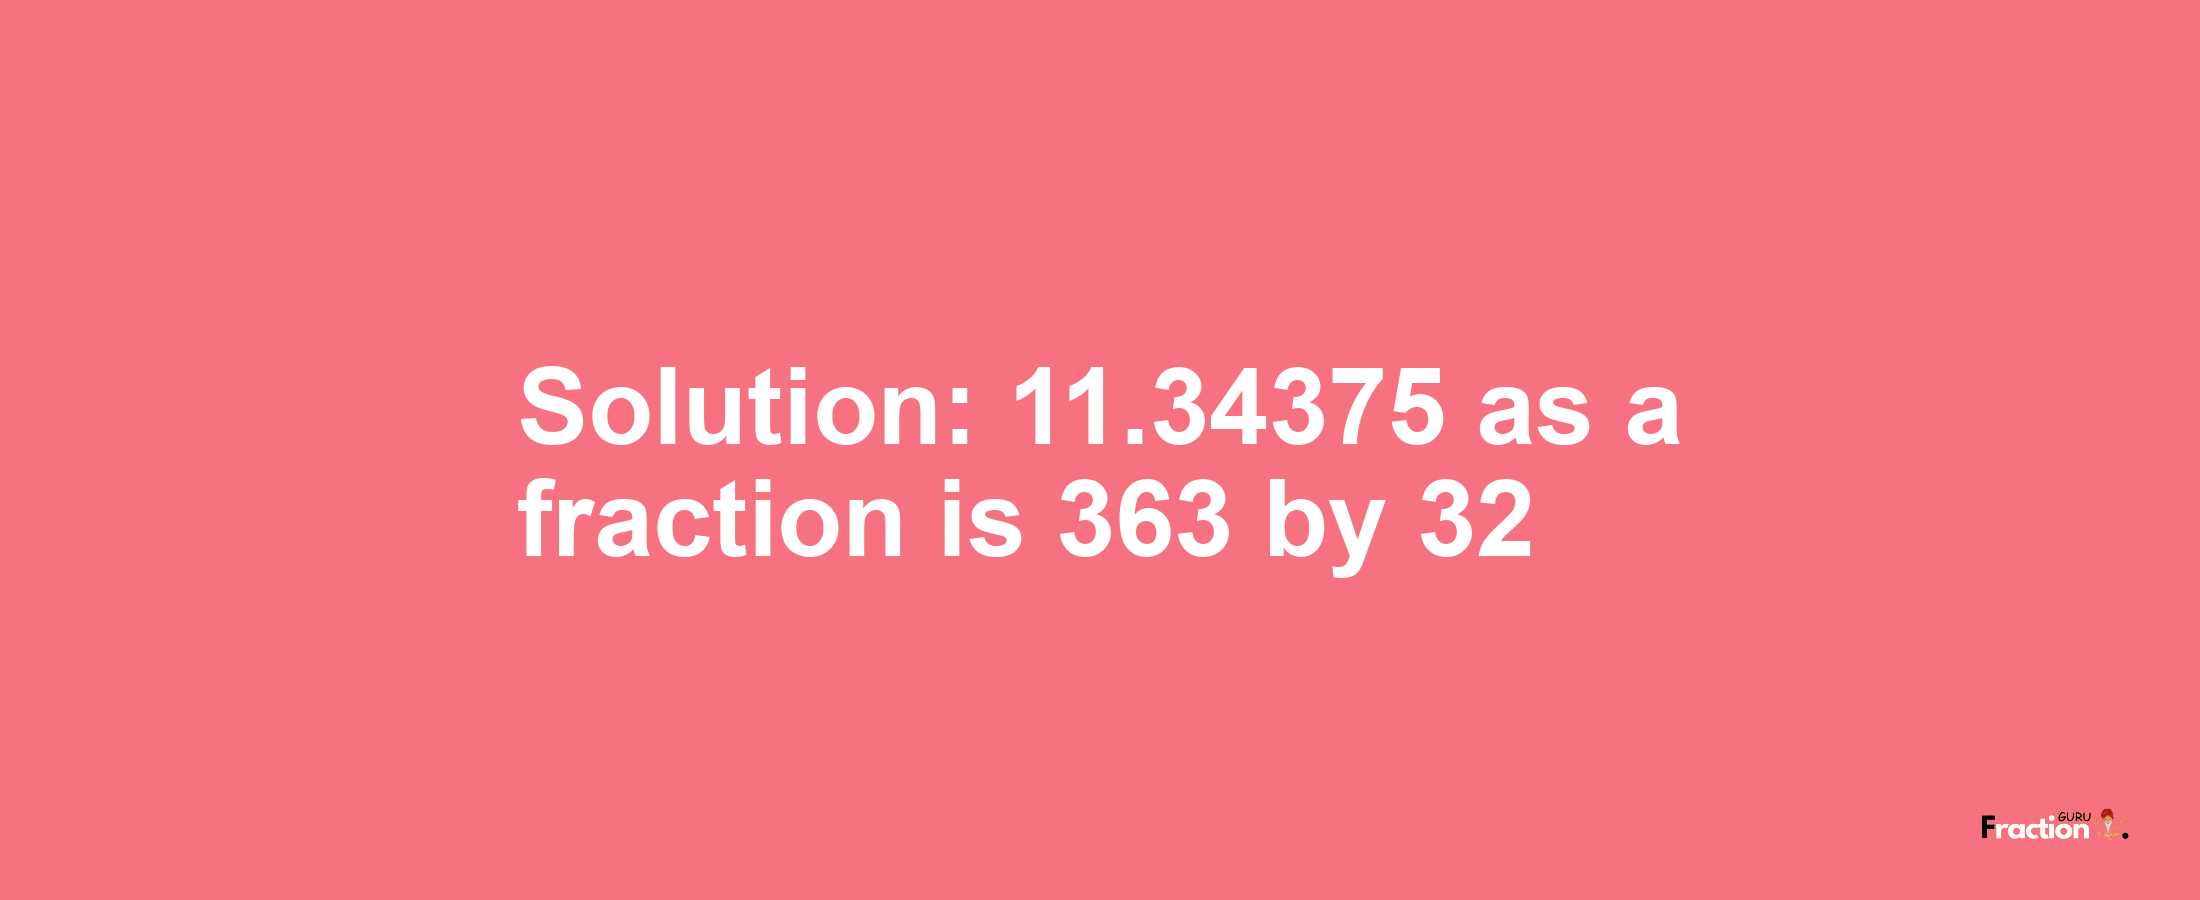 Solution:11.34375 as a fraction is 363/32